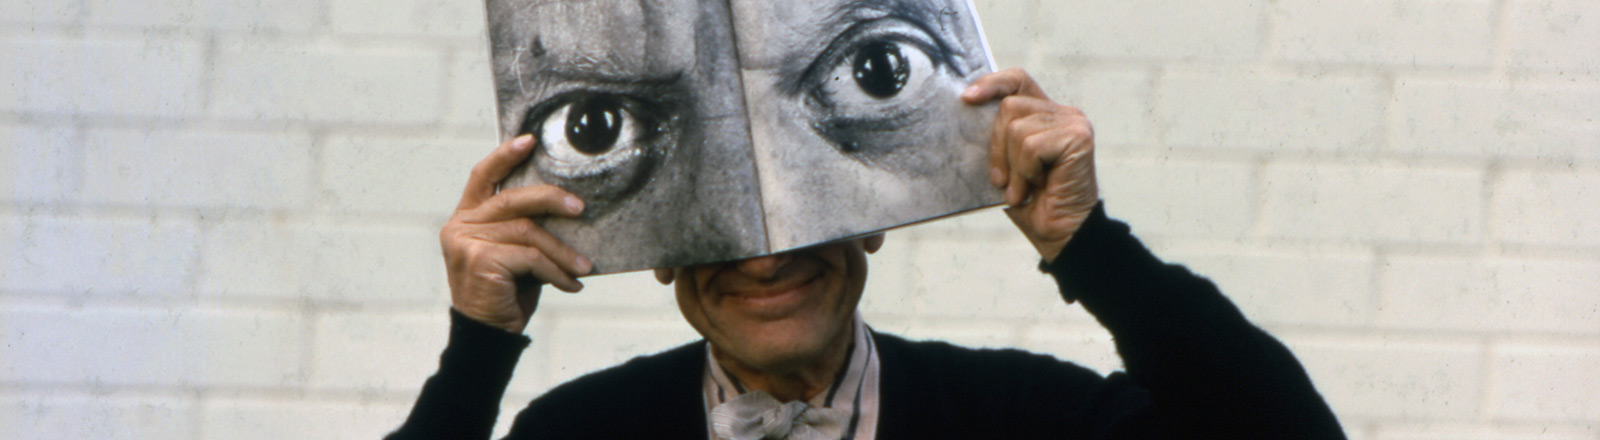 Charles Eames holds an open magazine to his face; on the two pages of the magazine are large men's eyes in black and white